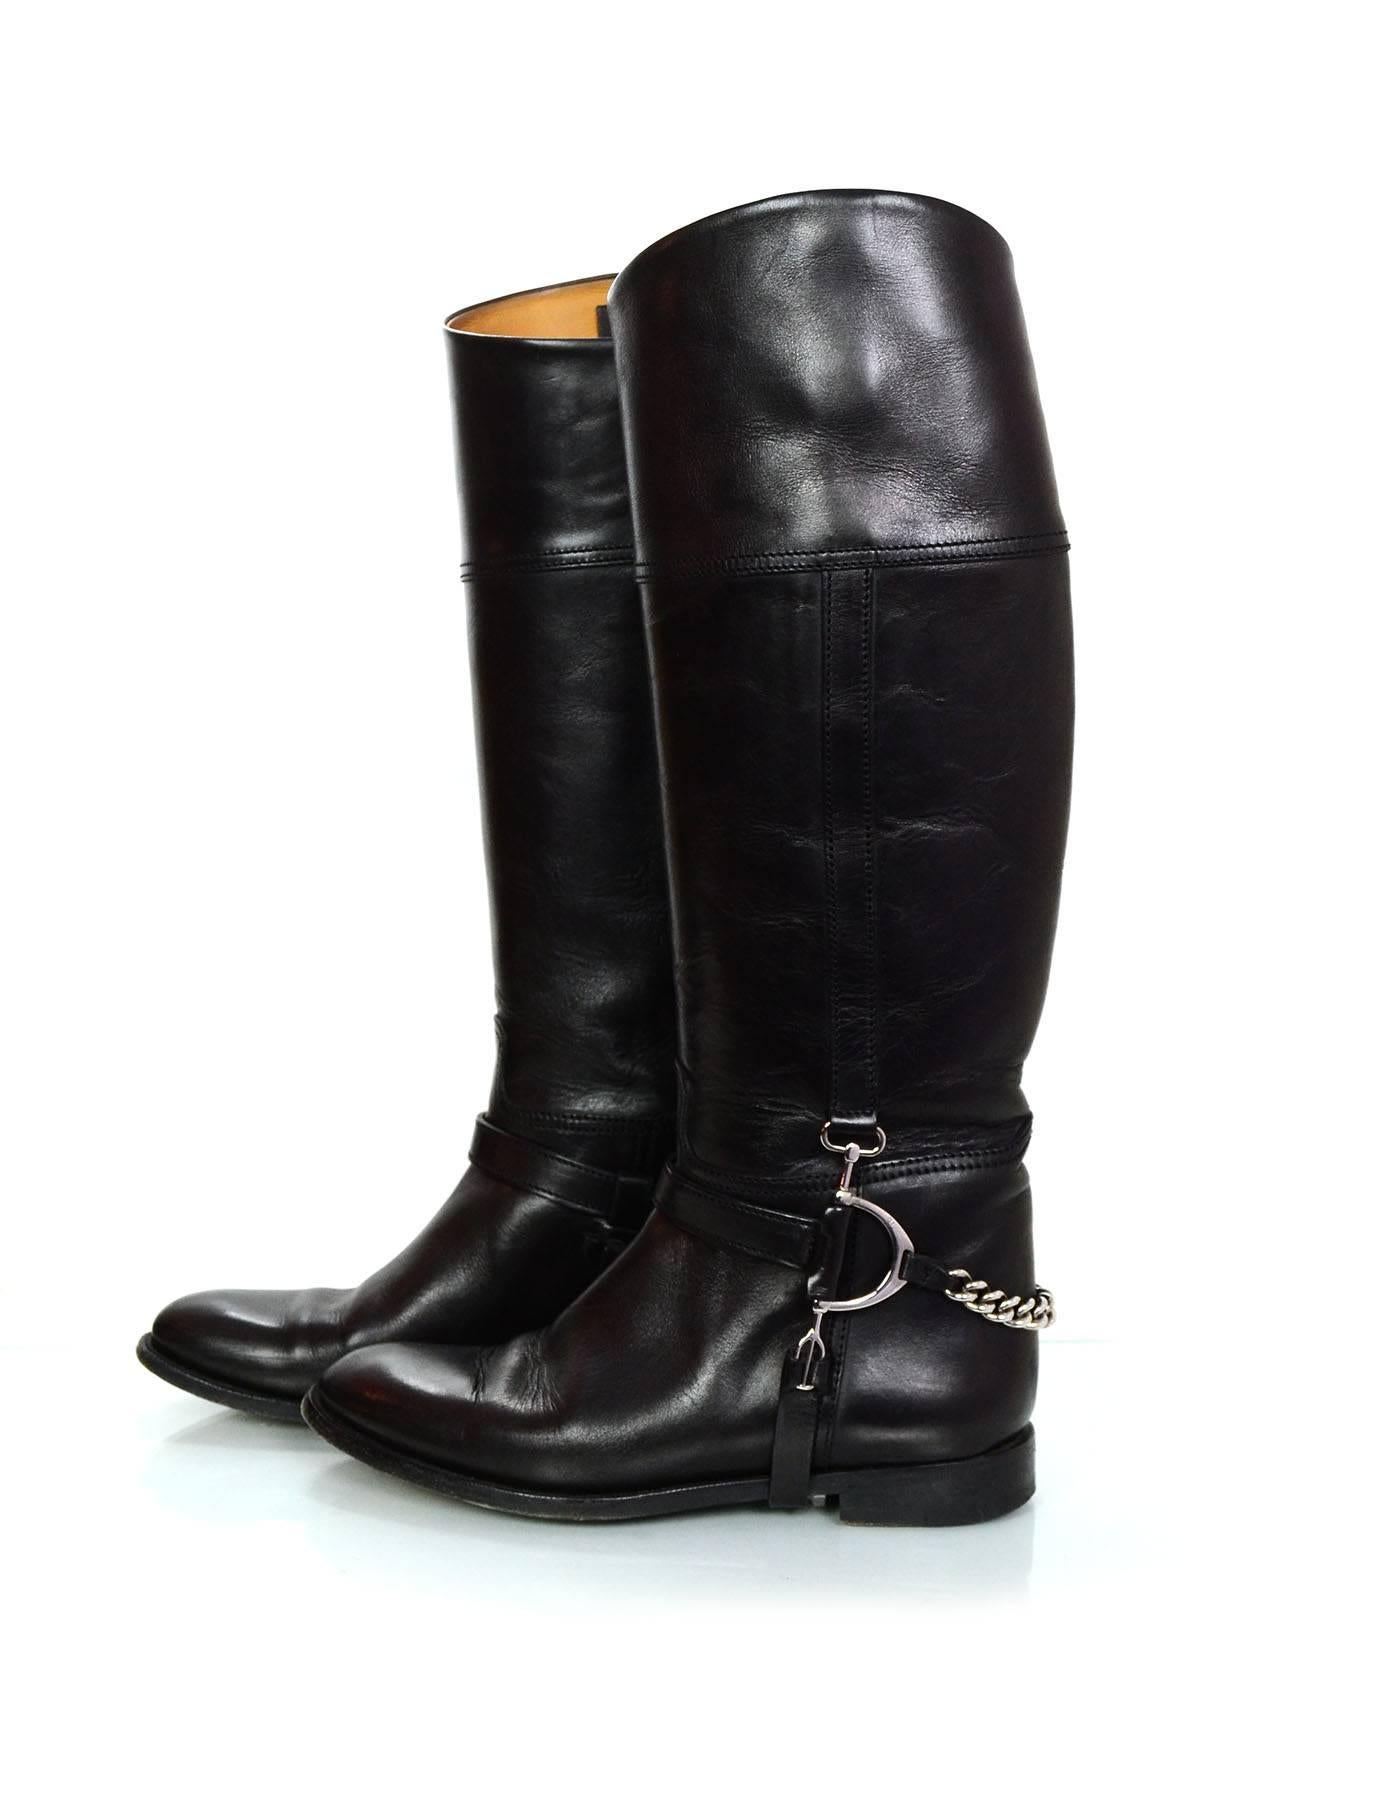 Ralph Lauren Black Leather Riding Boots Sz 6.5
Features buckle and chain detail at ankles

Made In: Italy
Color: Black
Materials: Leather, metal
Closure/Opening: Pull on 
Sole Stamp: Ralph Lauren Collection Made in Italy 6.5
Overall